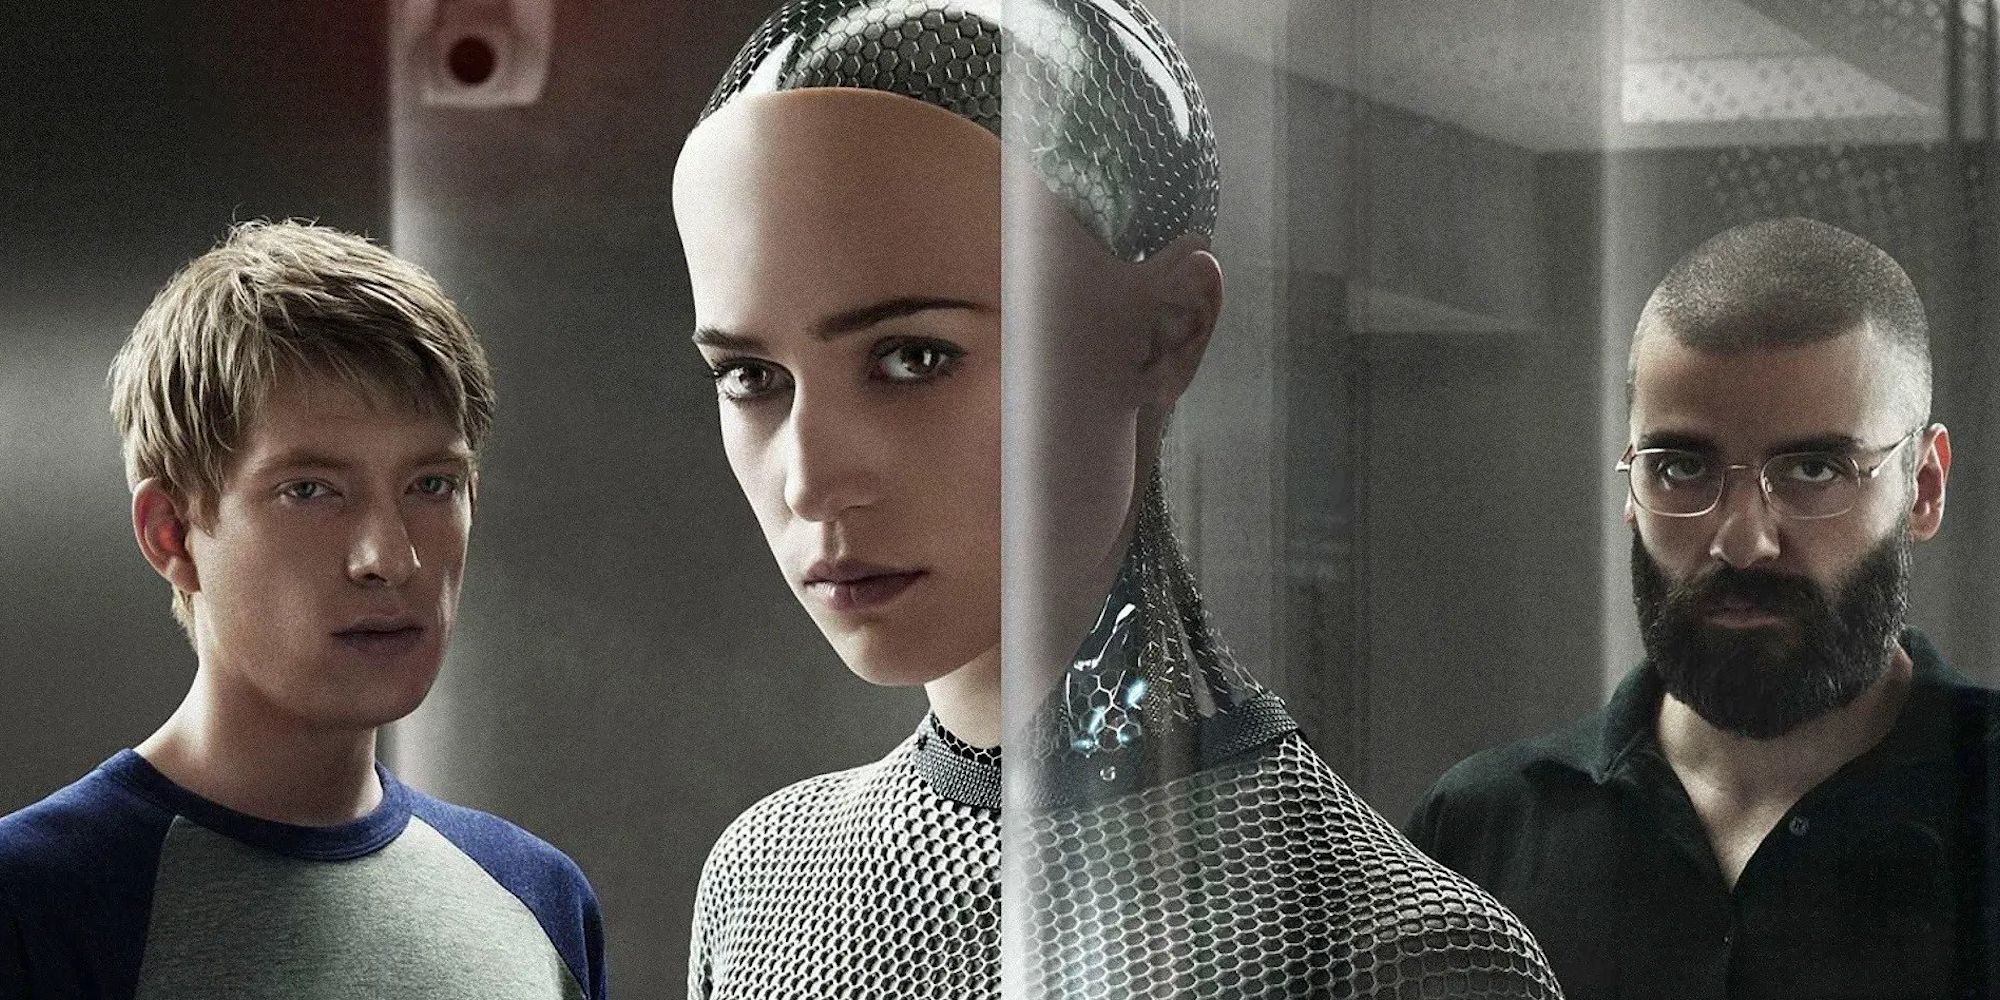 The main characters from Ex-Machina in a promo image for the film.